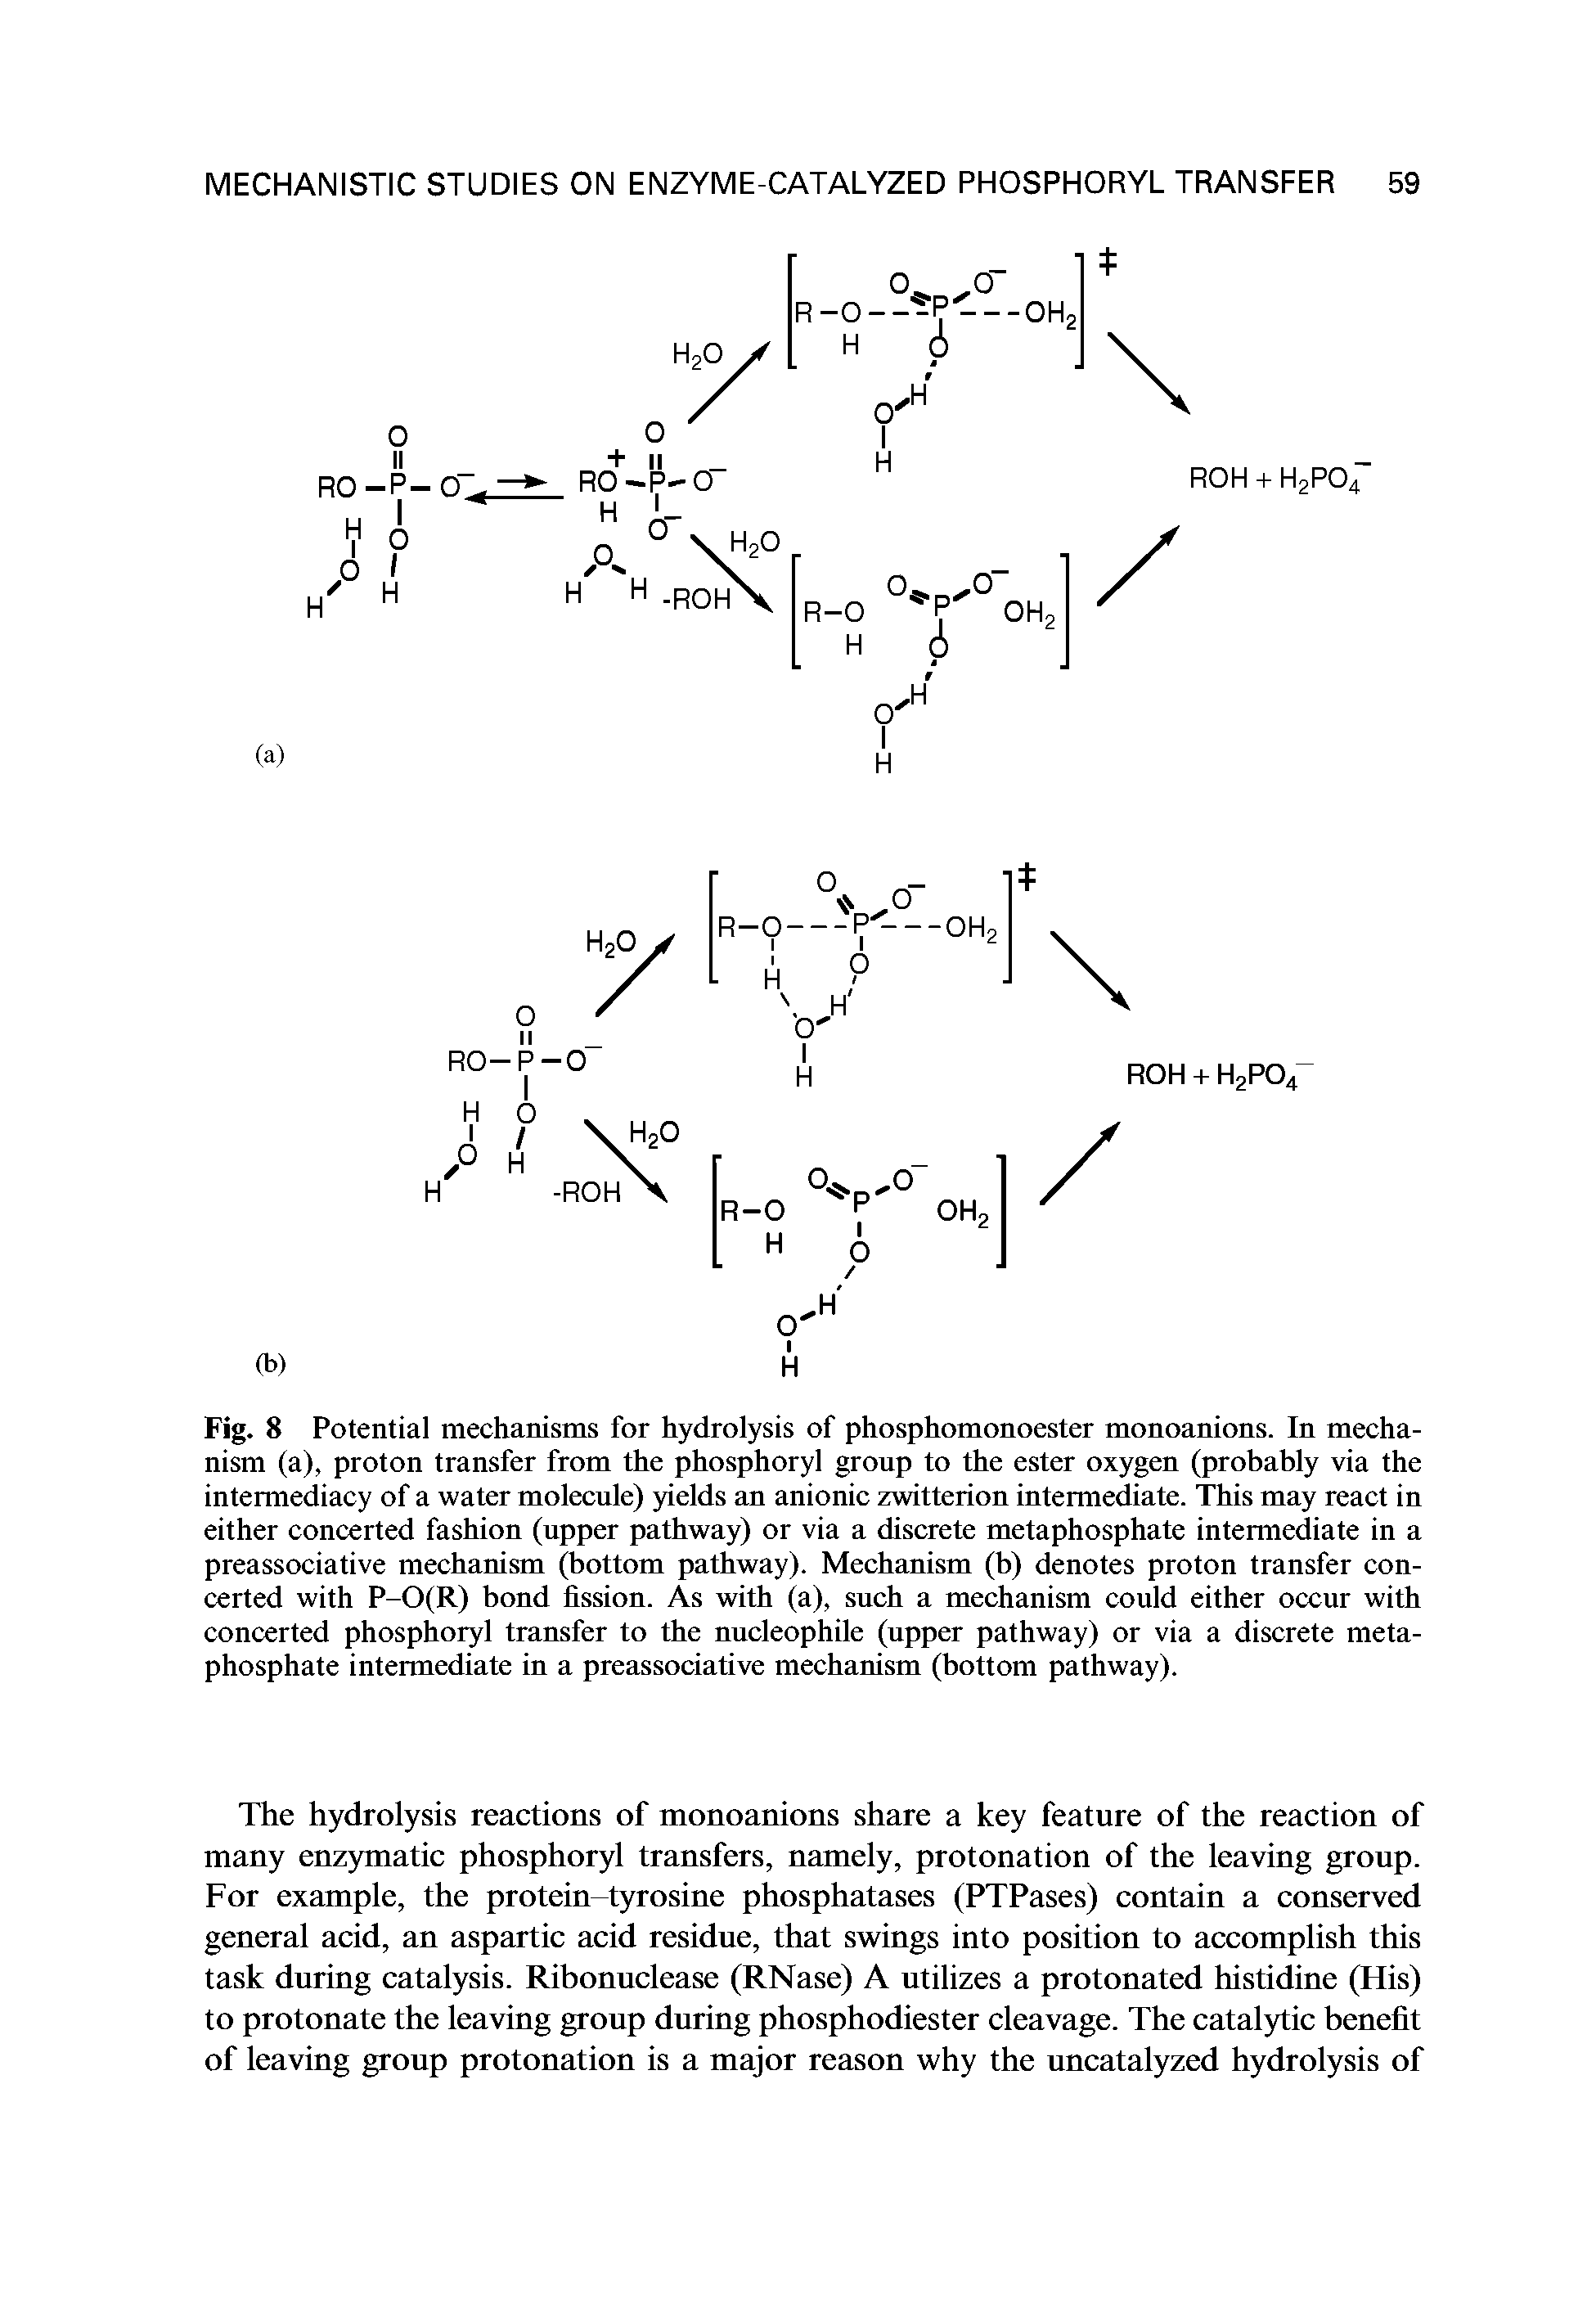 Fig. 8 Potential mechanisms for hydrolysis of phosphomonoester monoanions. In mechanism (a), proton transfer from the phosphoryl group to the ester oxygen (probably via the intermediacy of a water molecule) yields an anionic zwitterion intermediate. This may react in either concerted fashion (upper pathway) or via a discrete metaphosphate intermediate in a preassociative mechanism (bottom pathway). Mechanism (b) denotes proton transfer concerted with P-O(R) bond fission. As with (a), such a mechanism could either occur with concerted phosphoryl transfer to the nucleophile (upper pathway) or via a discrete metaphosphate intermediate in a preassociative mechanism (bottom pathway).